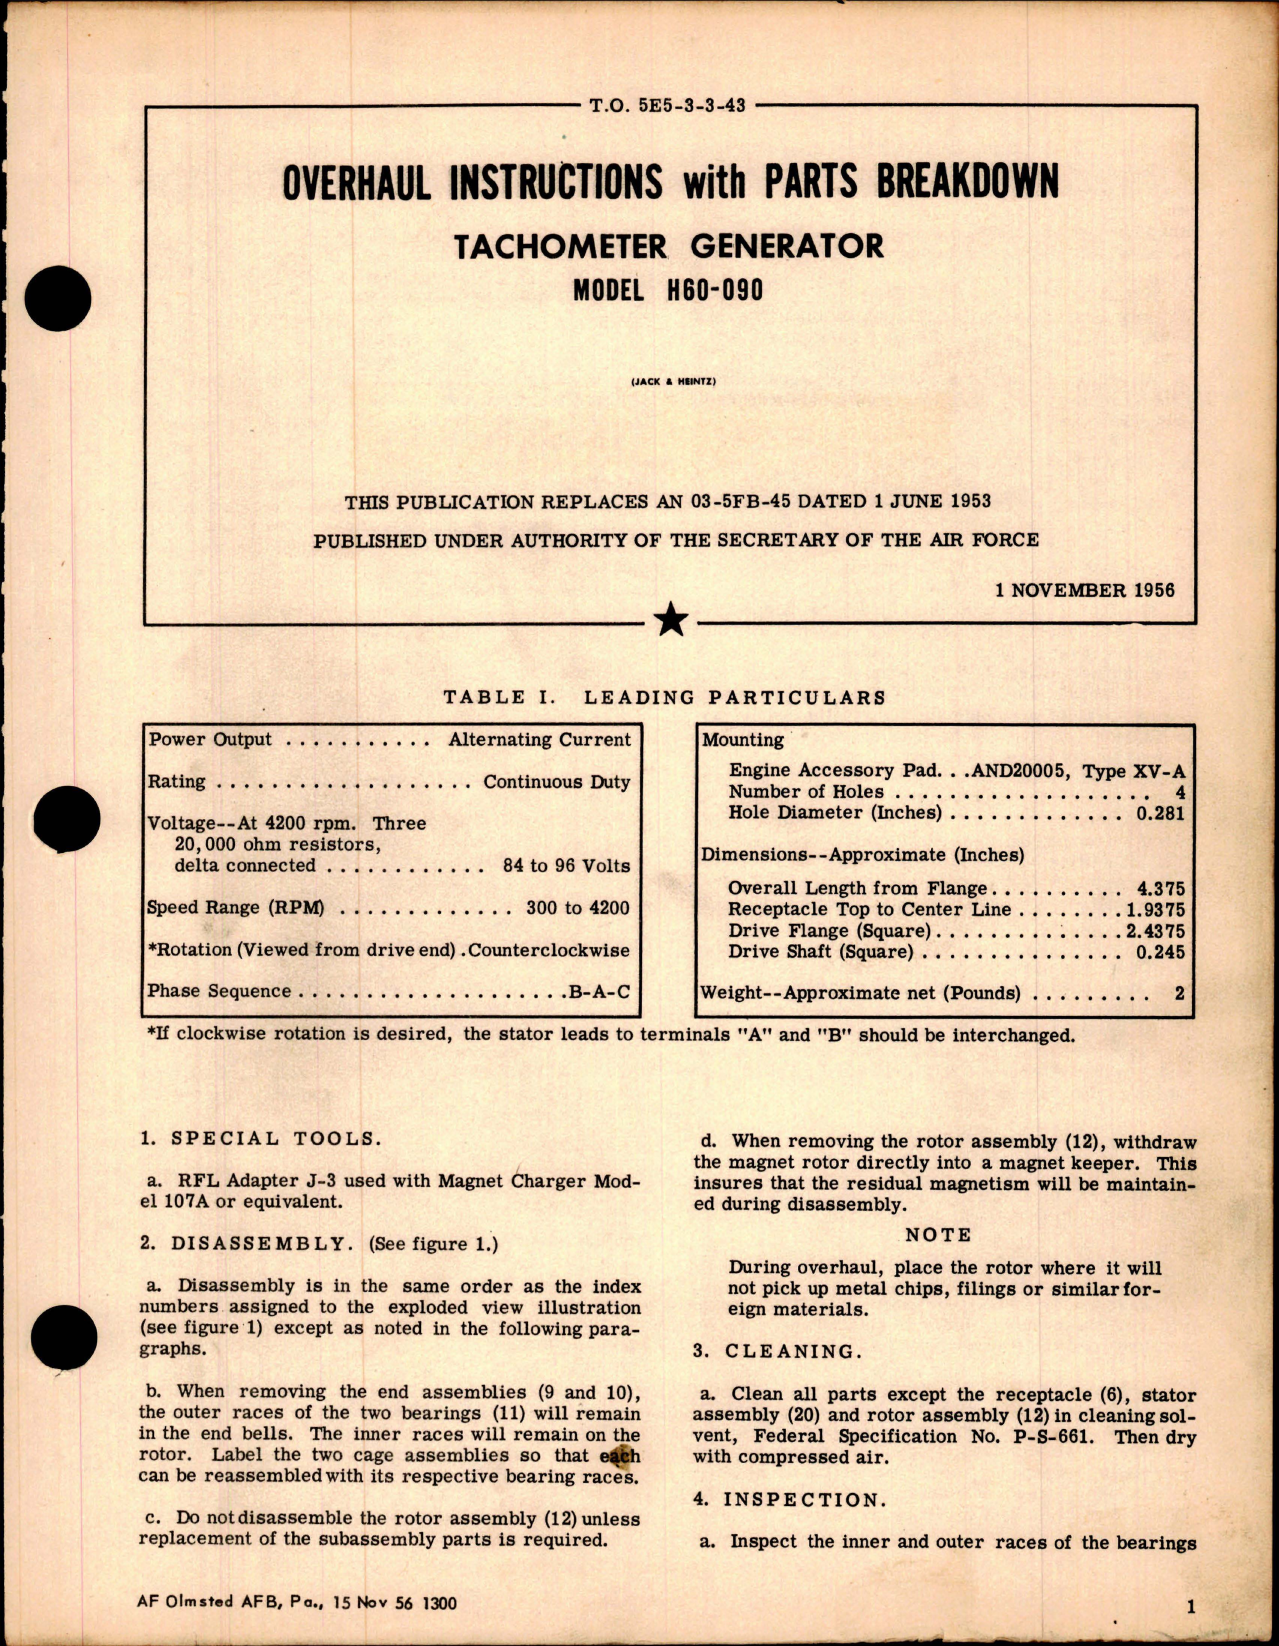 Sample page 1 from AirCorps Library document: Overhaul Instructions with Parts for Tachometer Generator - Model H60-090 